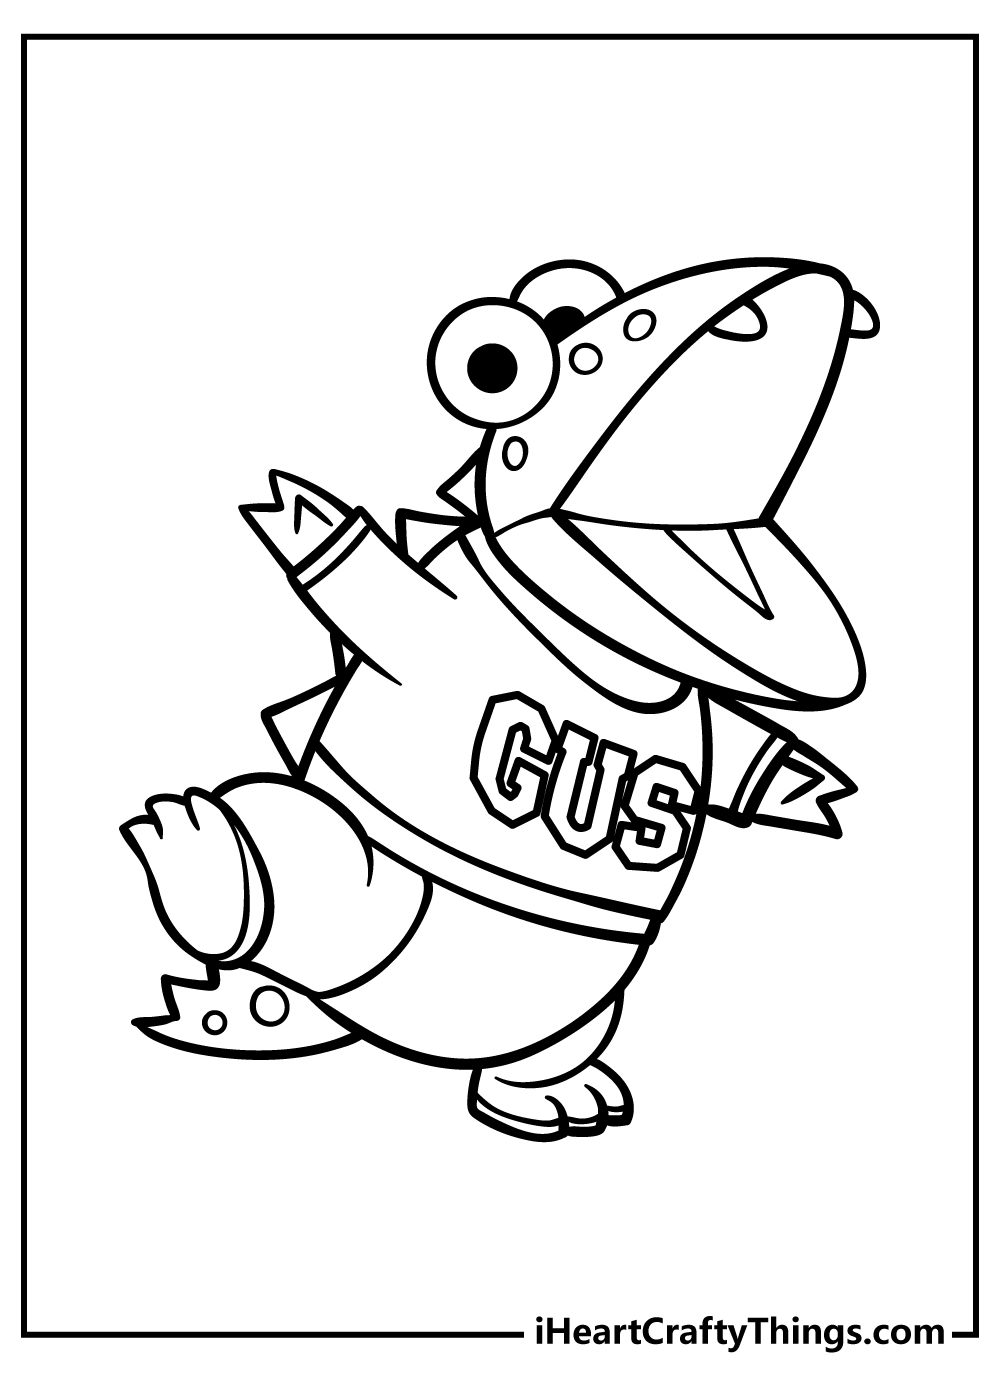 Ryan Coloring Pages for kids free download